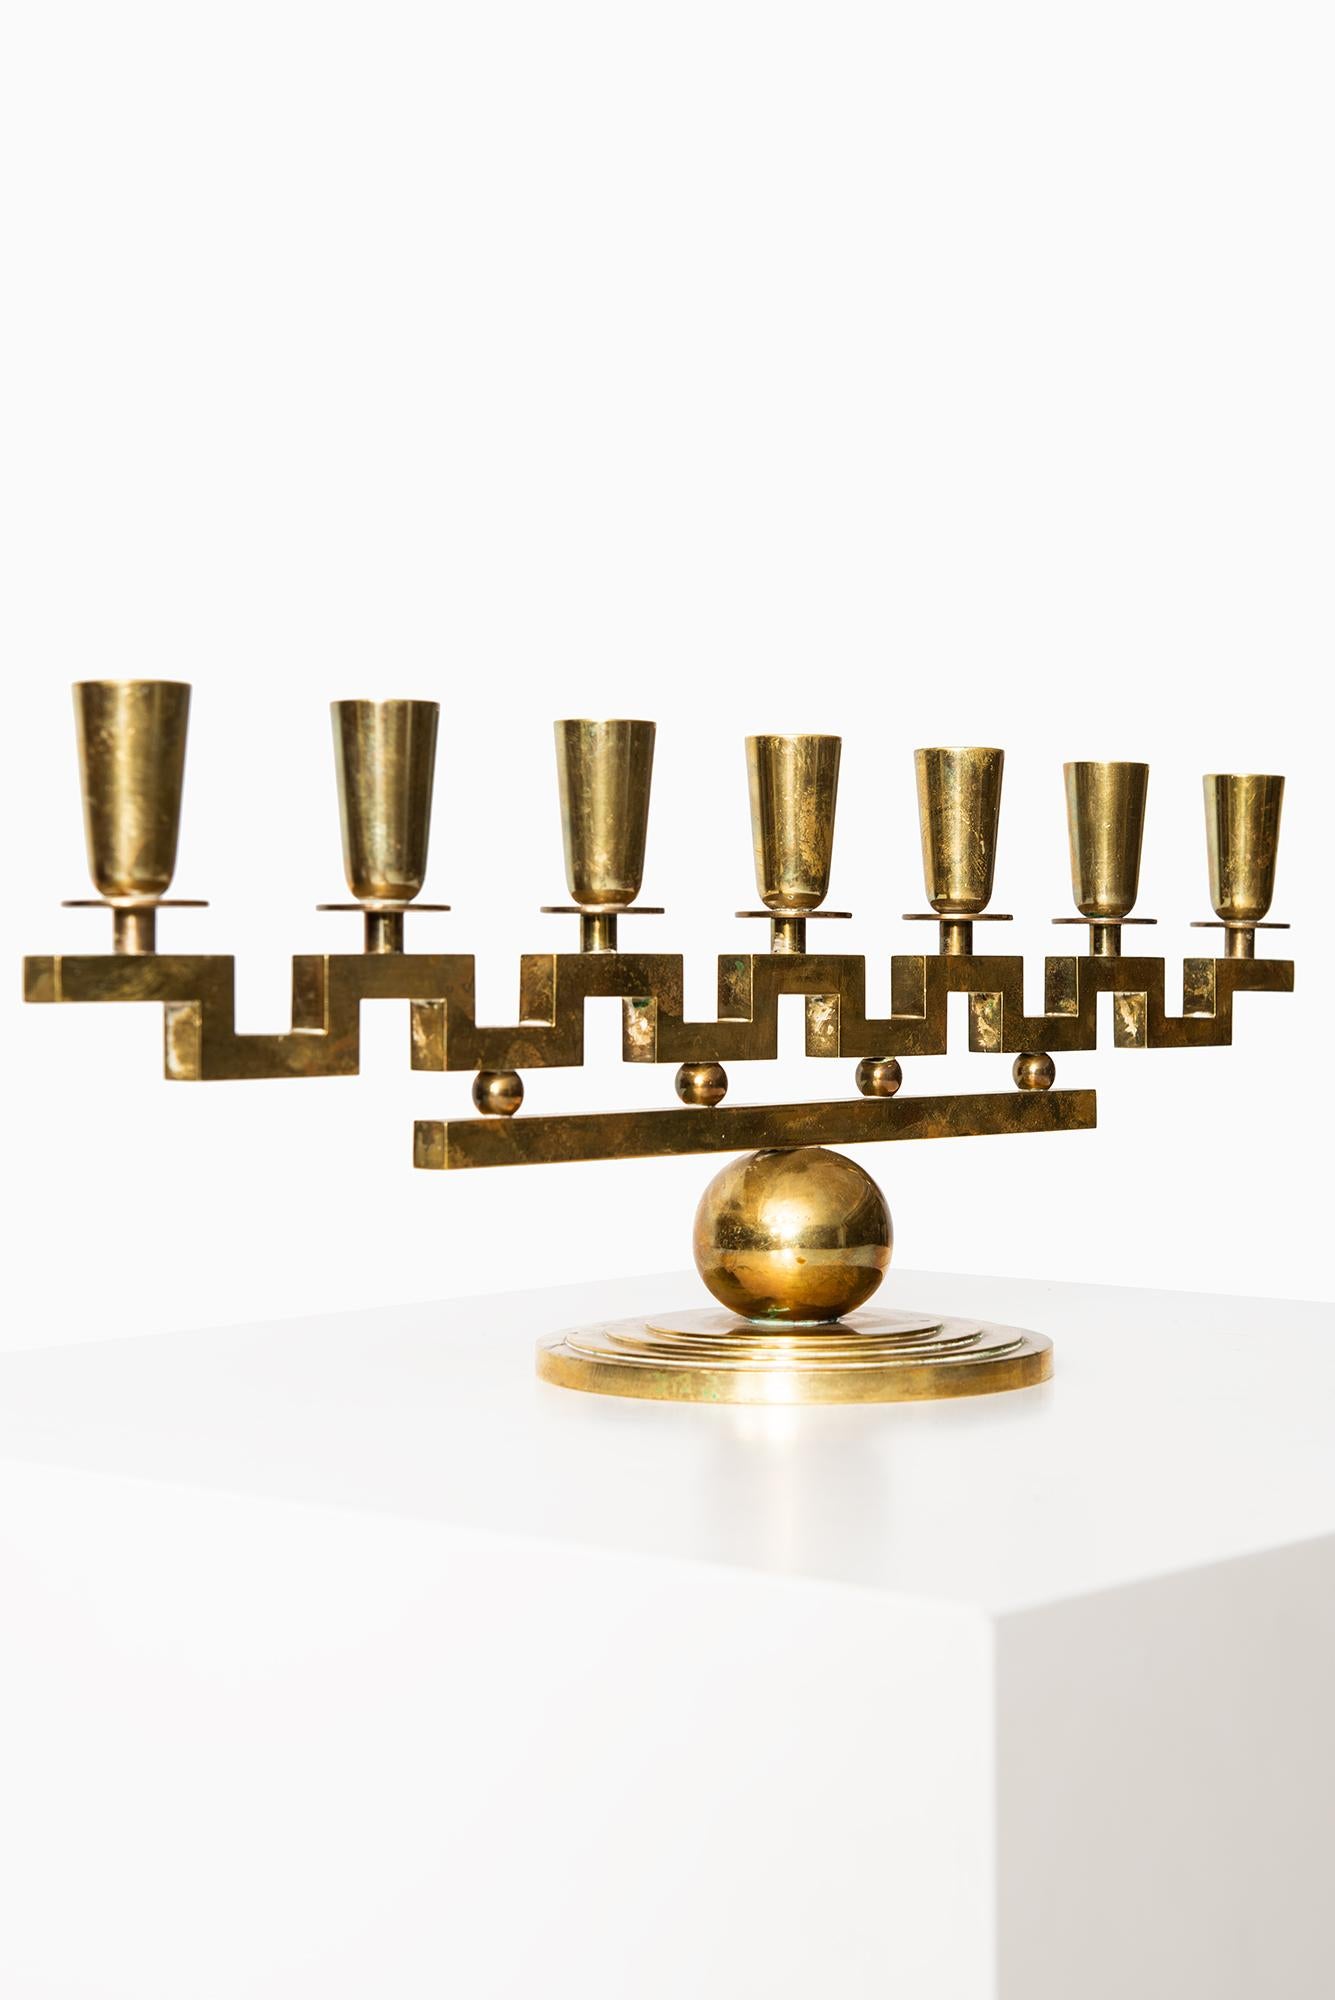 Lars Holmström Candlestick in Brass Produced in His Own Workshop in Arvika 1